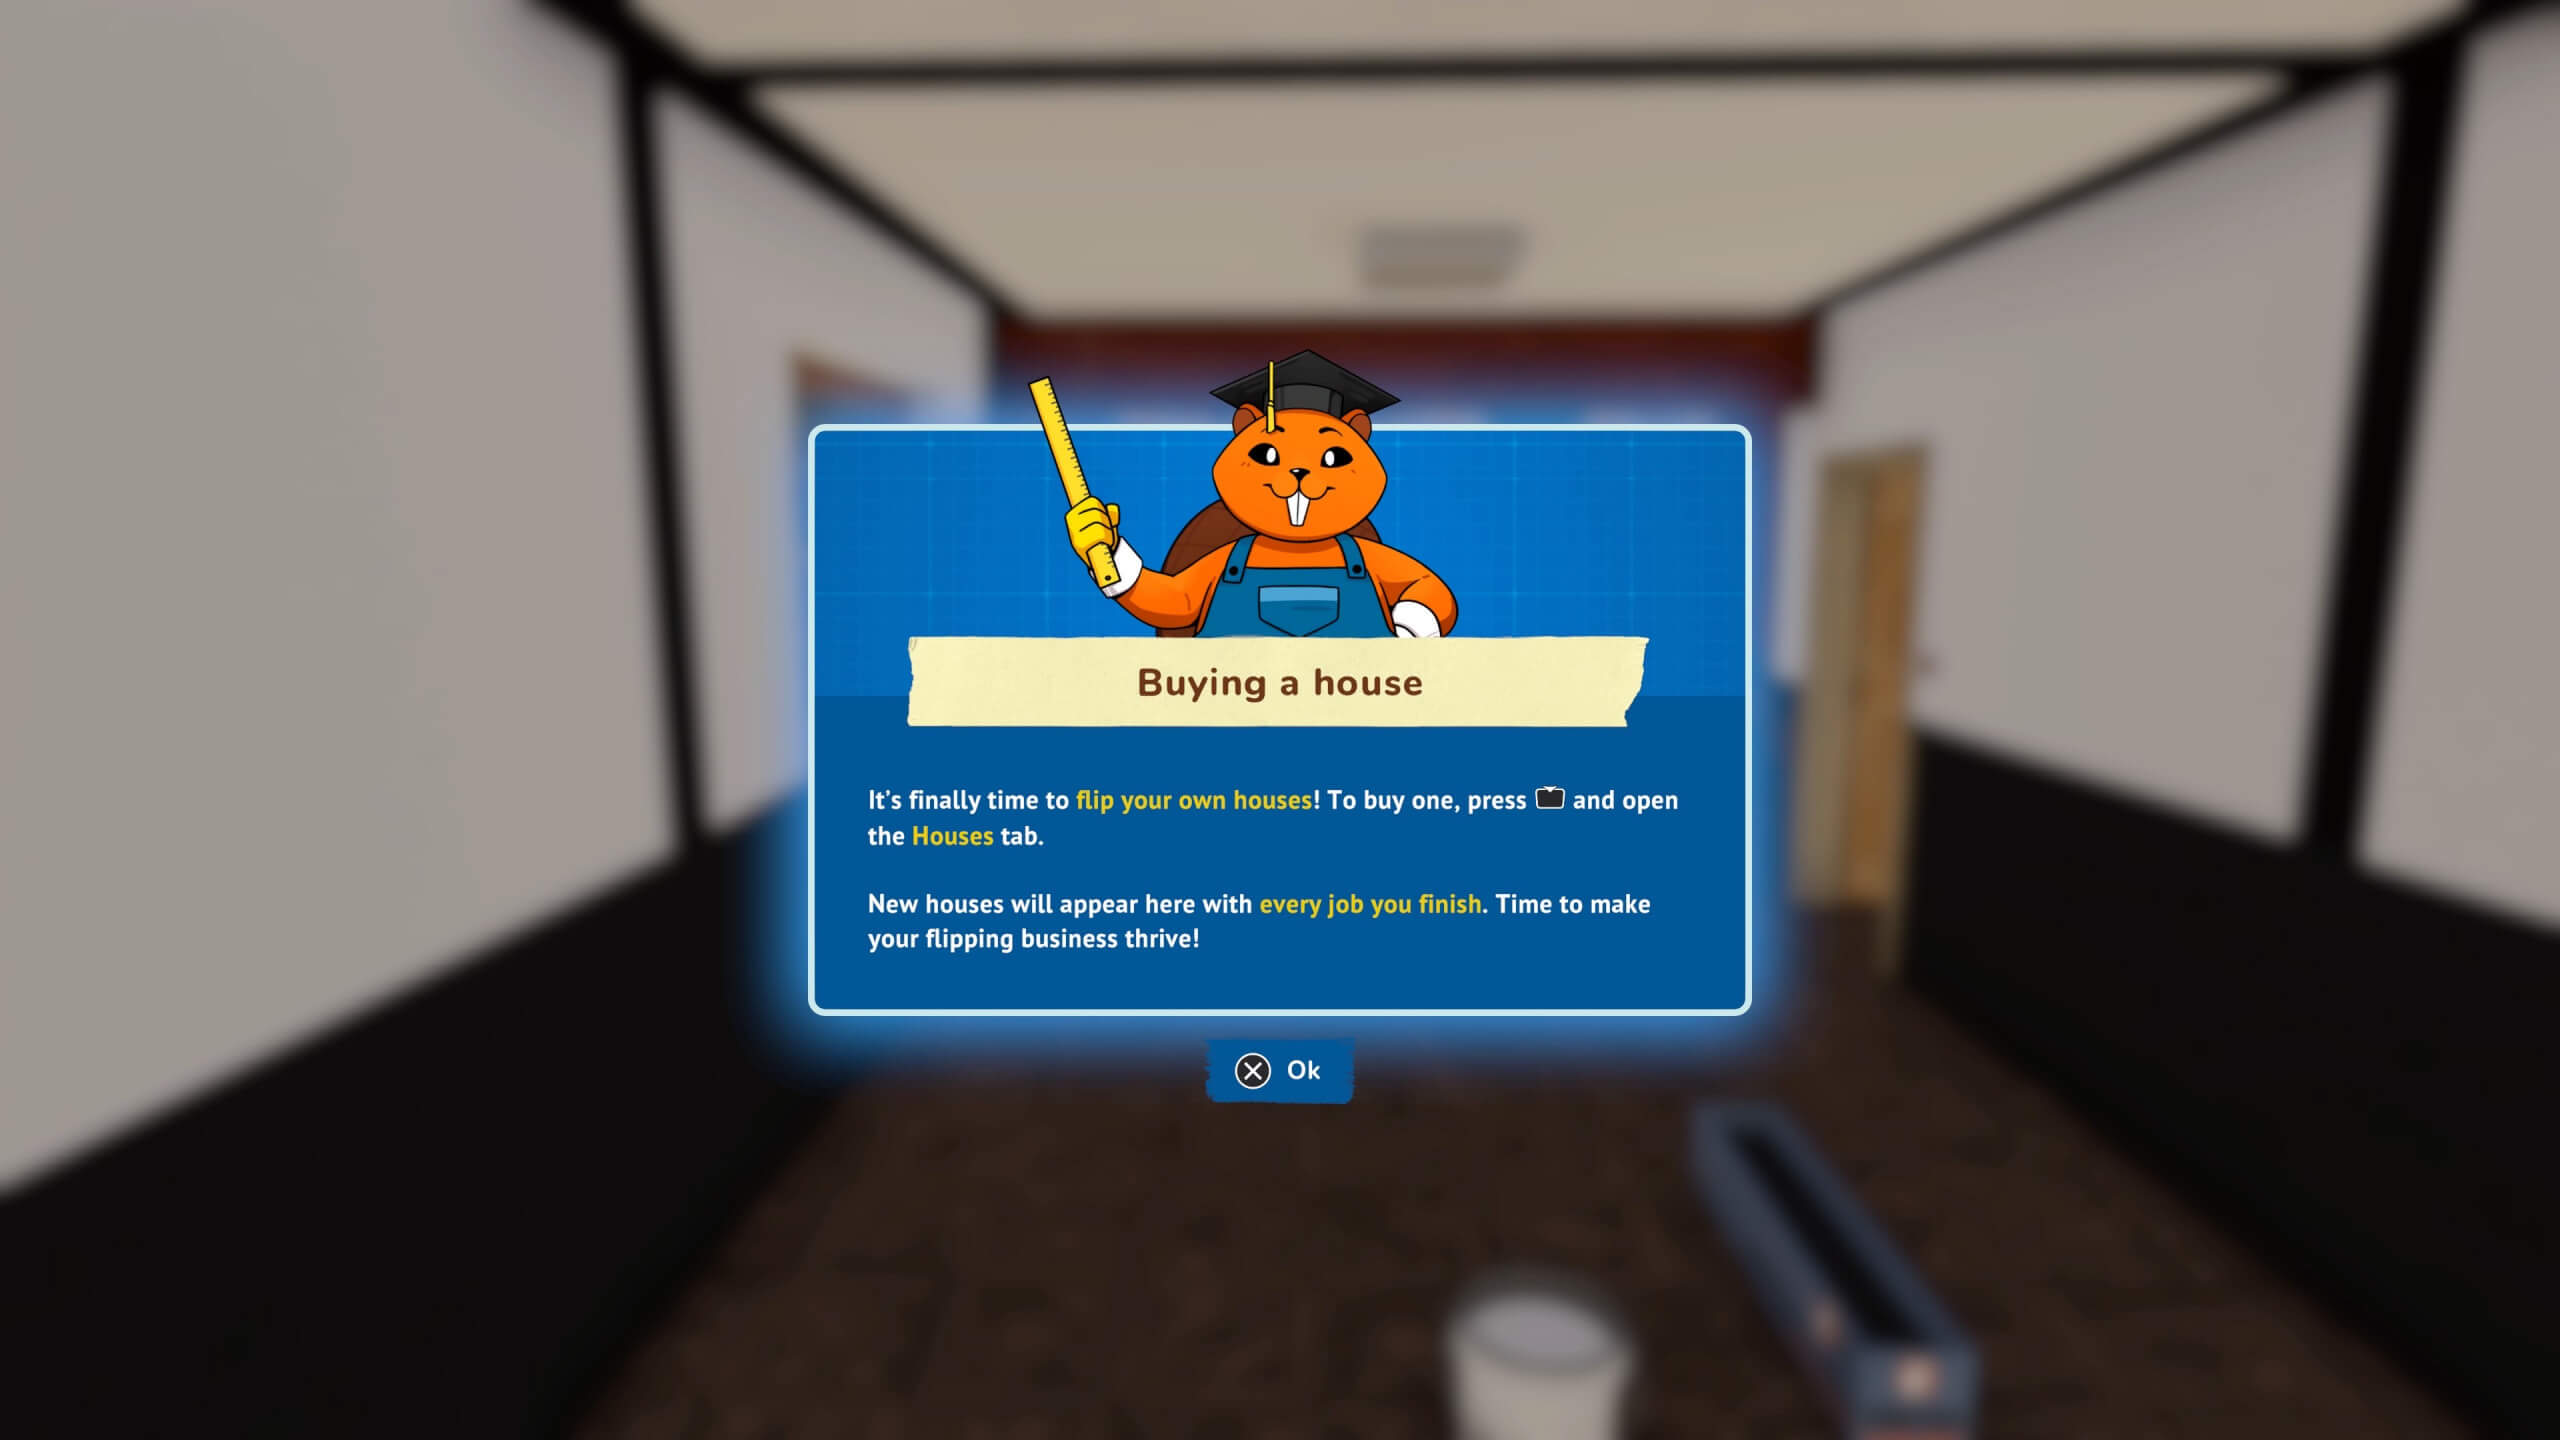 A notification appears on the screen that now allows the player to buy and flip their own houses.